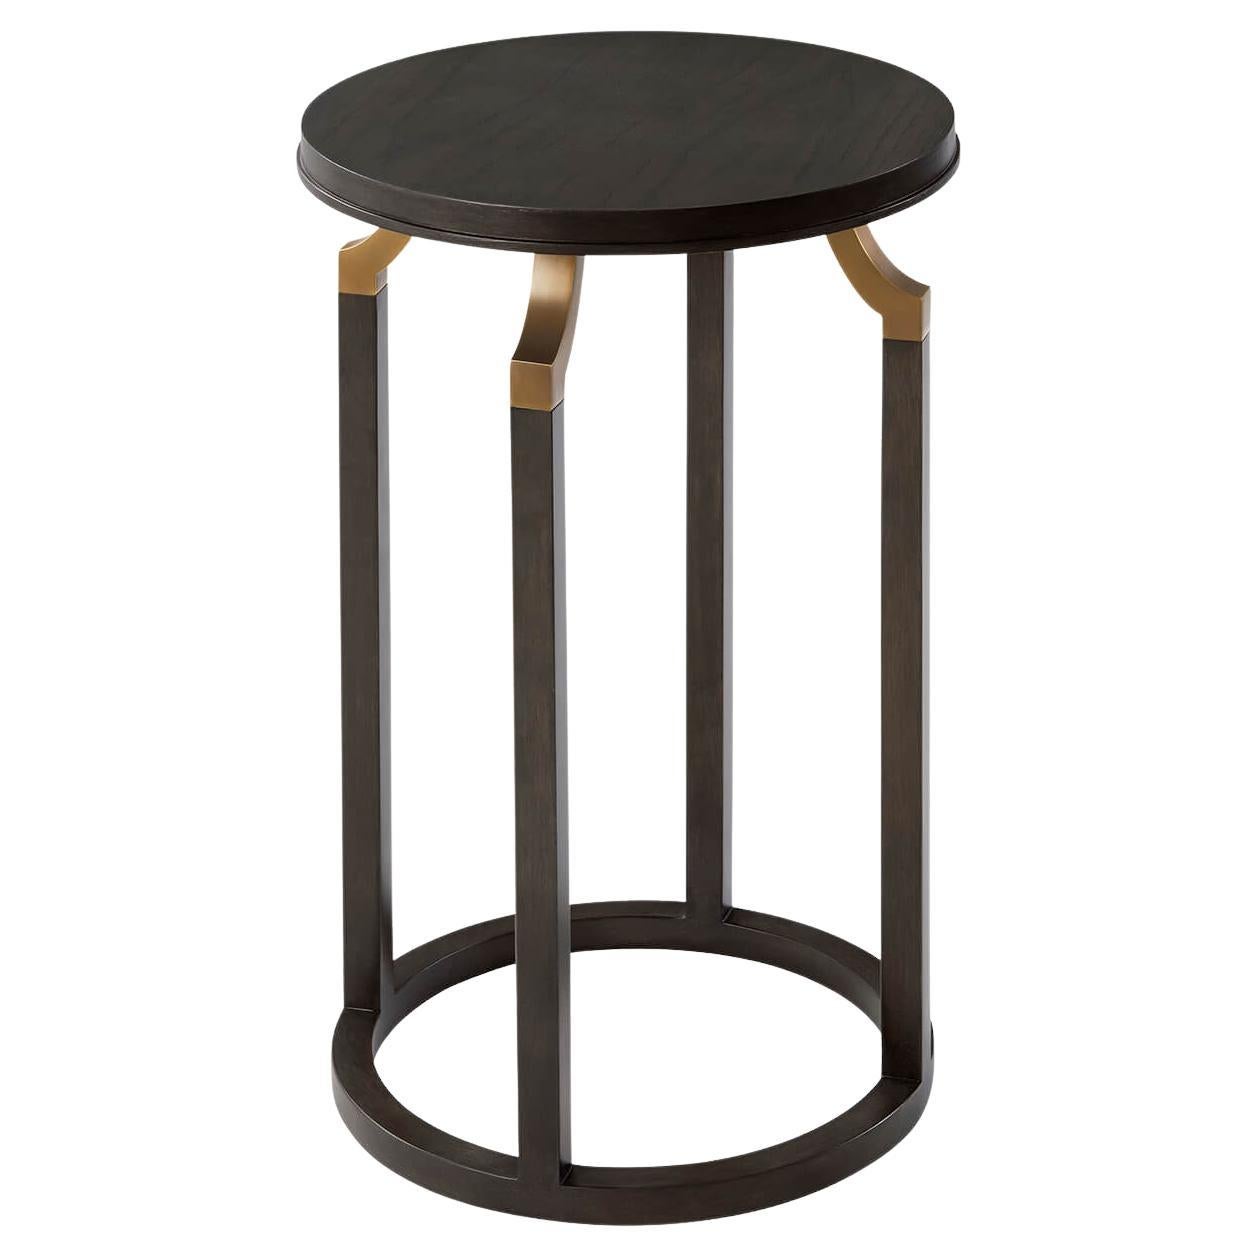 Small Art Deco Accent Table For Sale